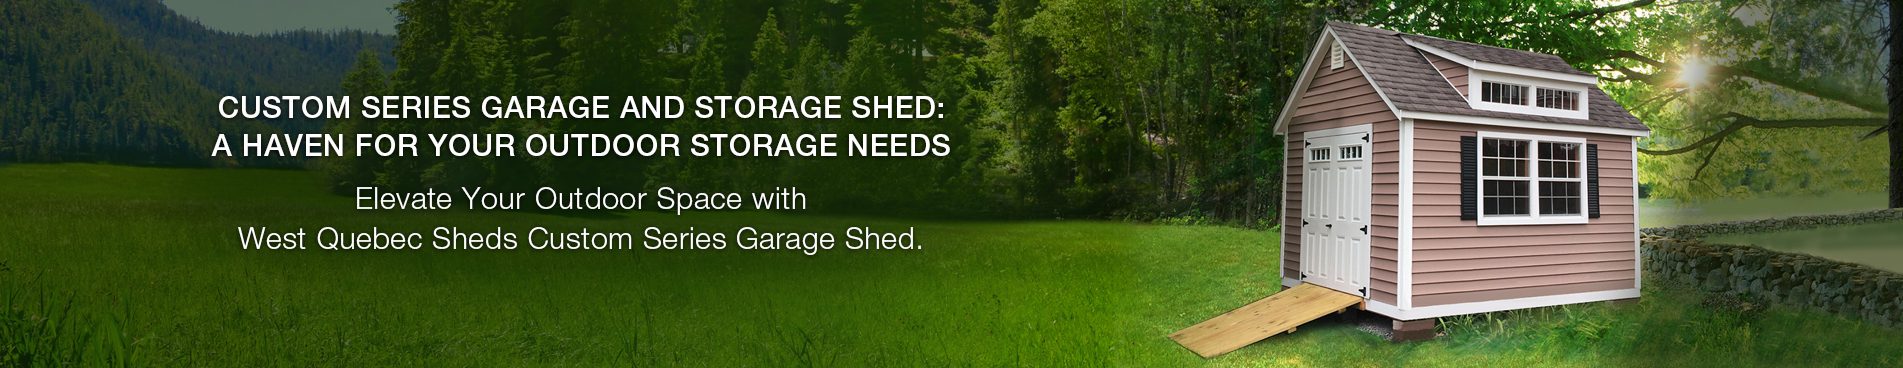 Custom Series Garage and Storage Shed: A Haven for Your Outdoor Storage Needs